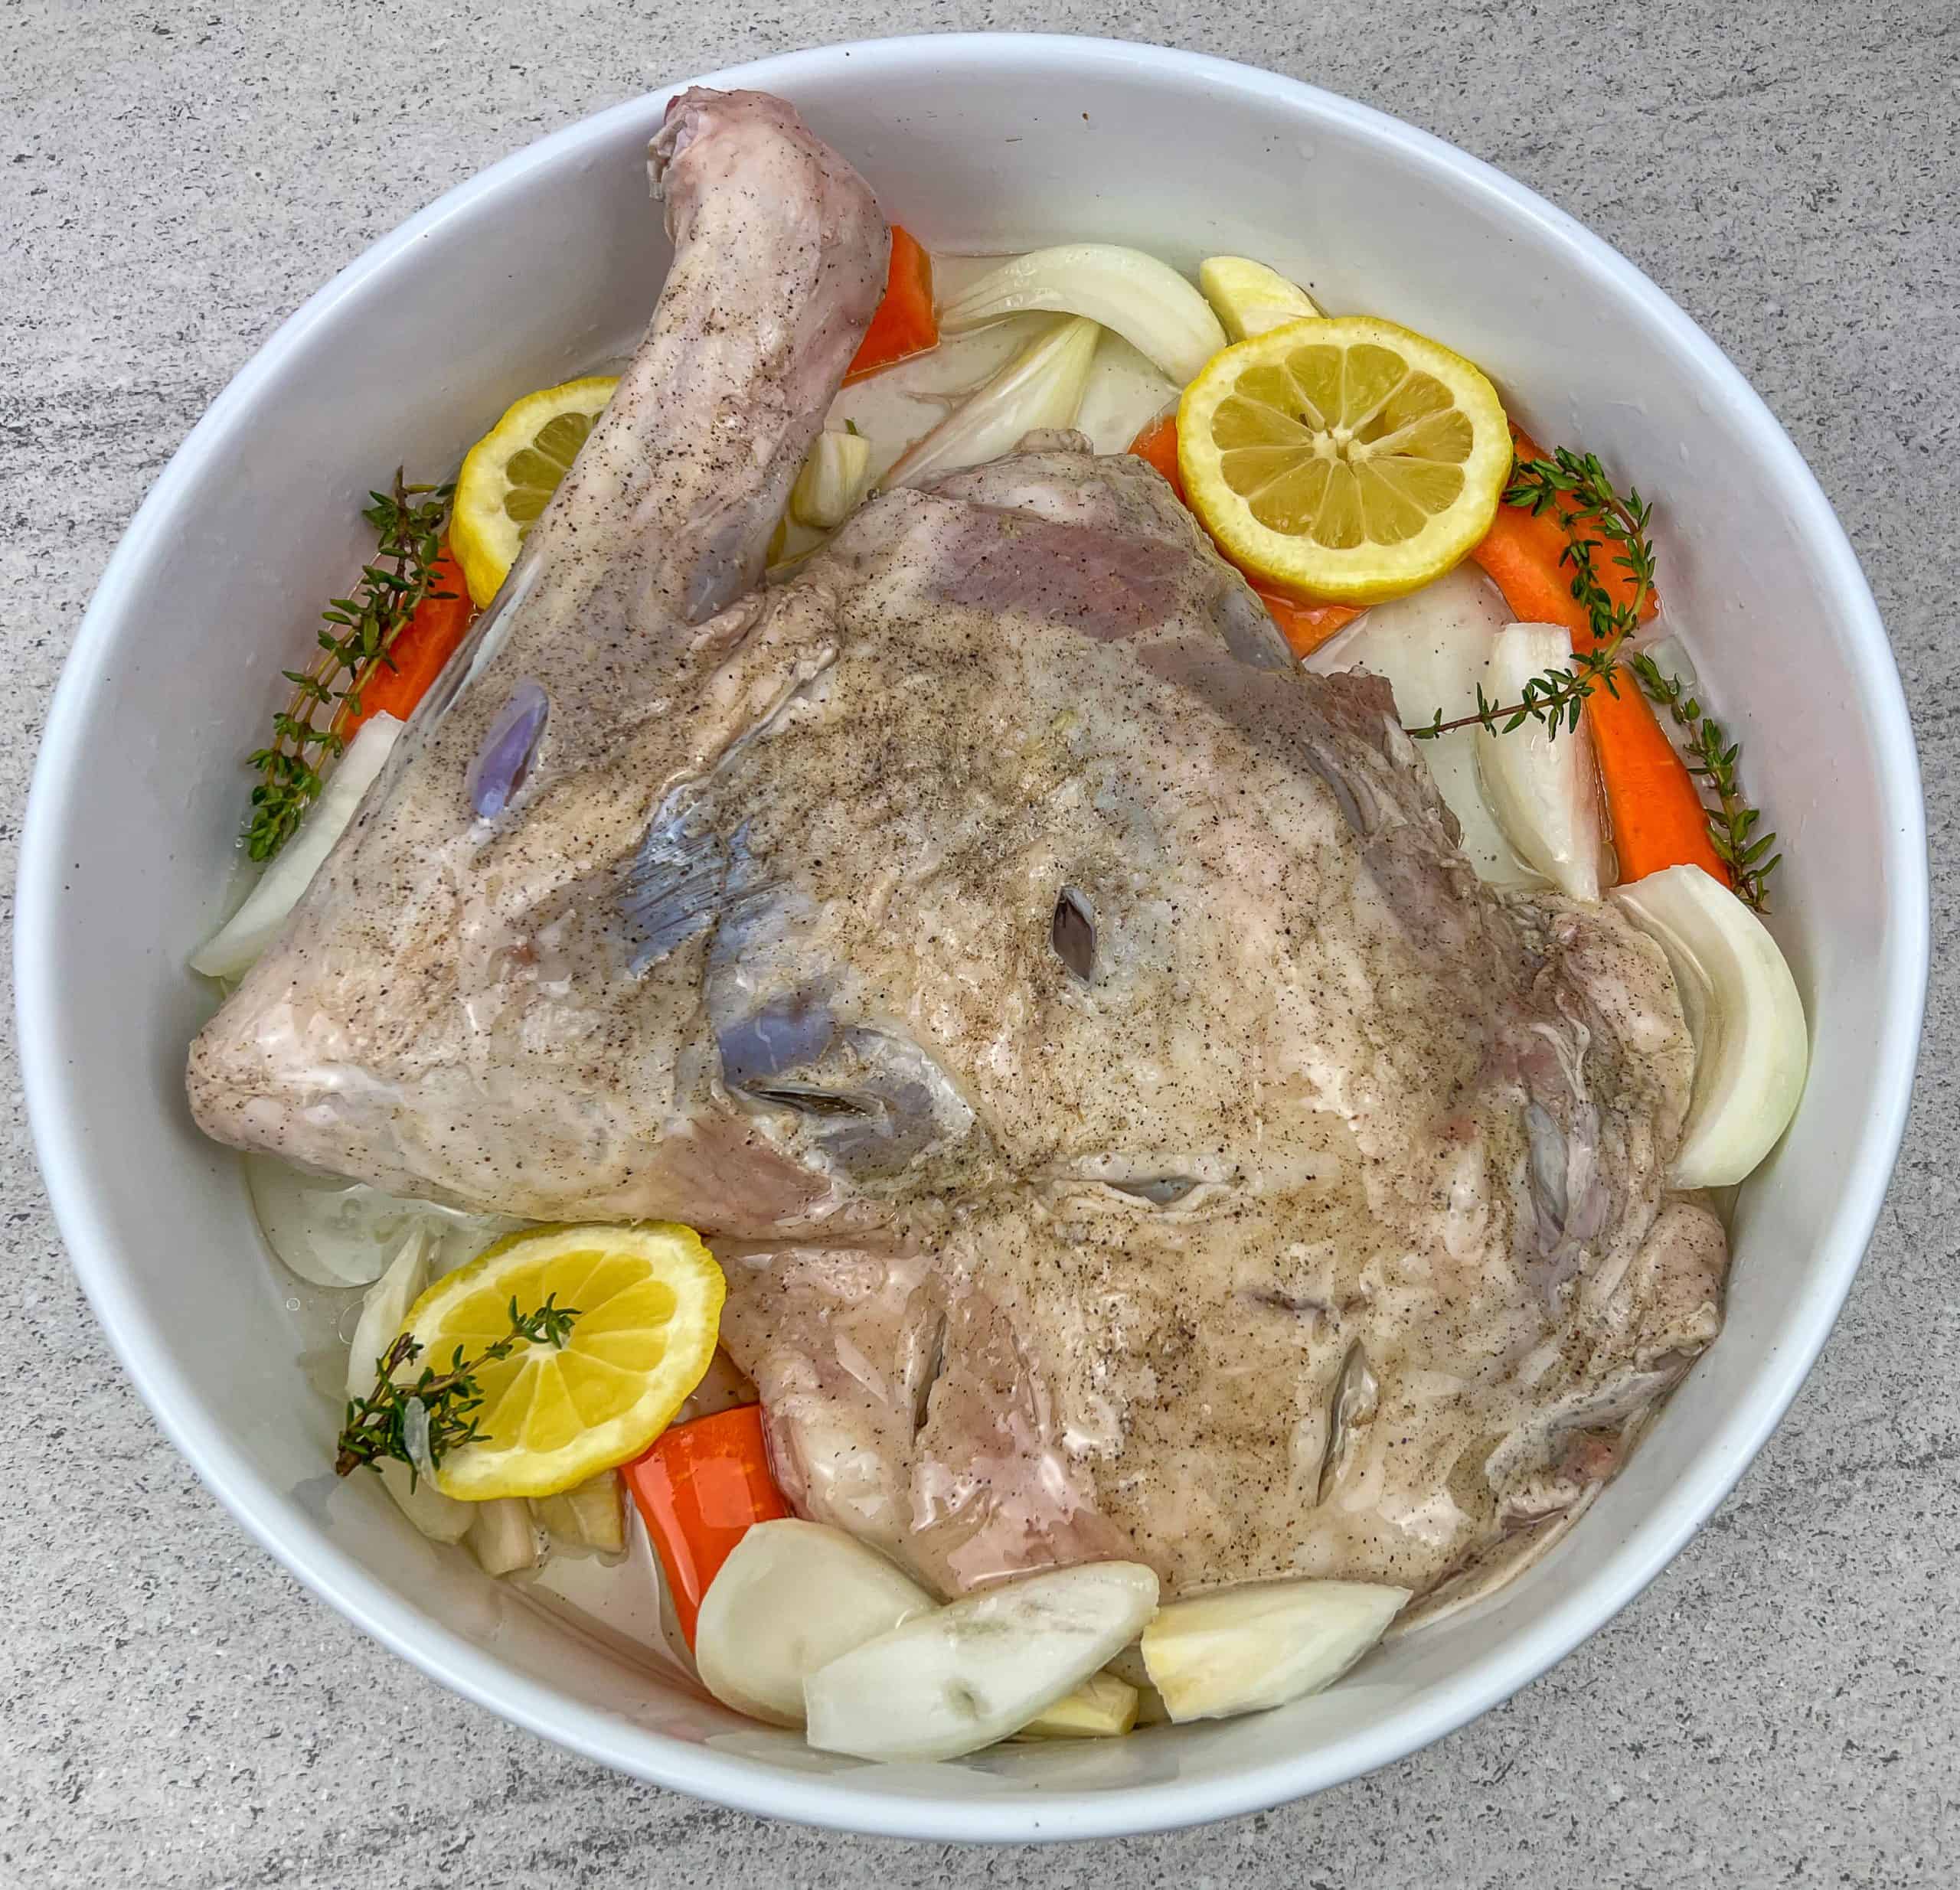 Greek style roasted leg of lamb with thyme - ready to bake